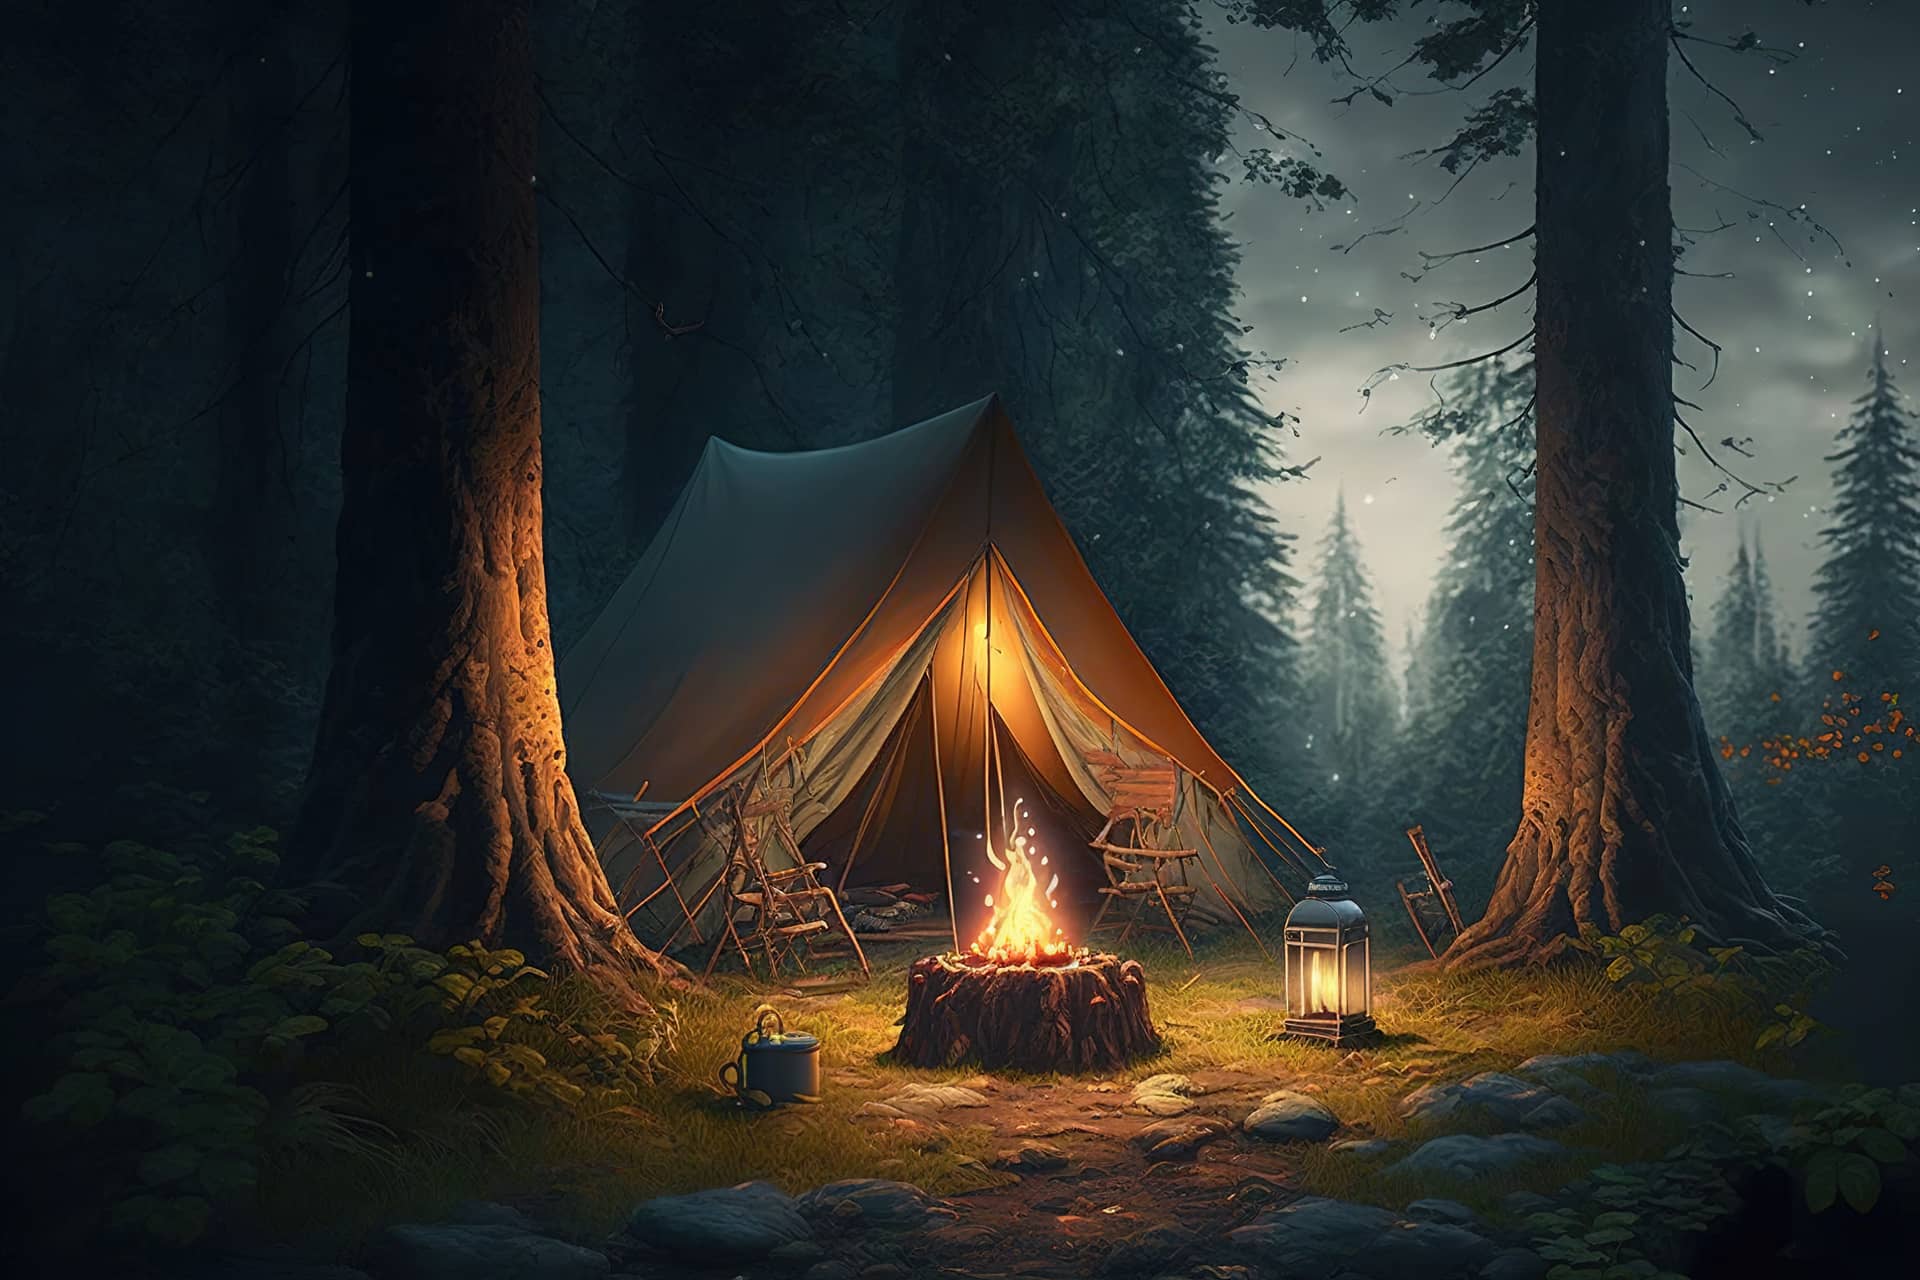 Camping night forest with camp fire nice picture